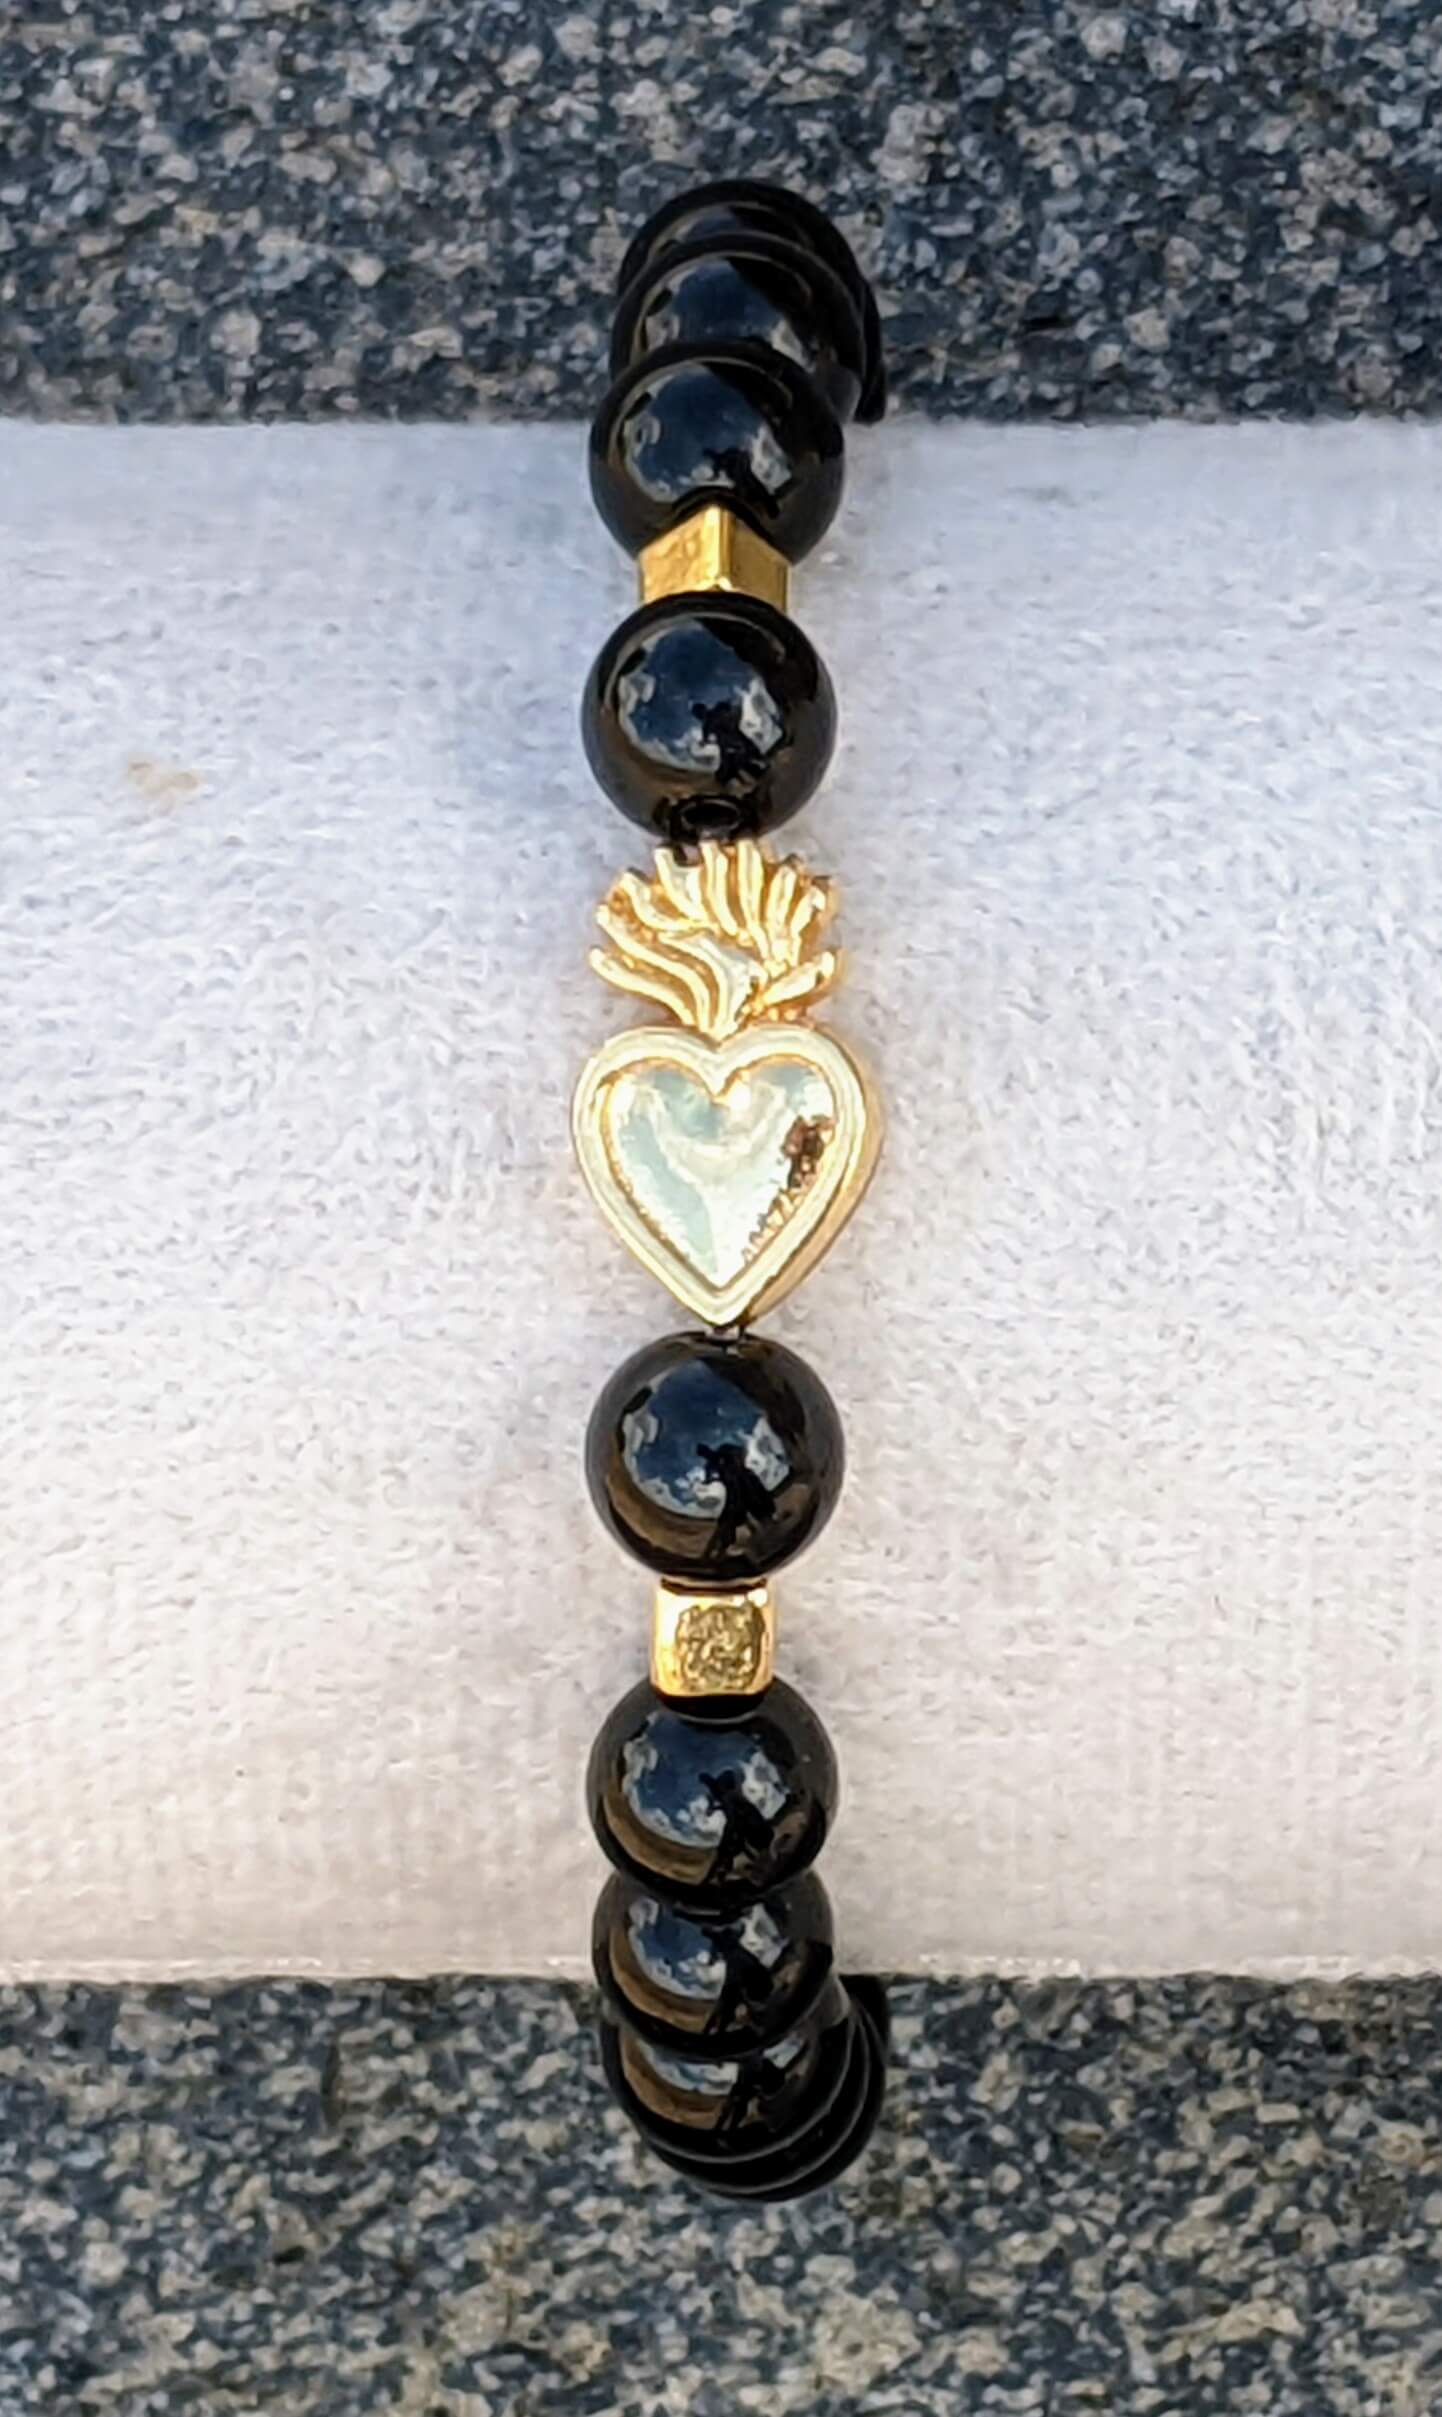 Black Onyx Polished (8mm Bead Size) with Flaming Golden Heart